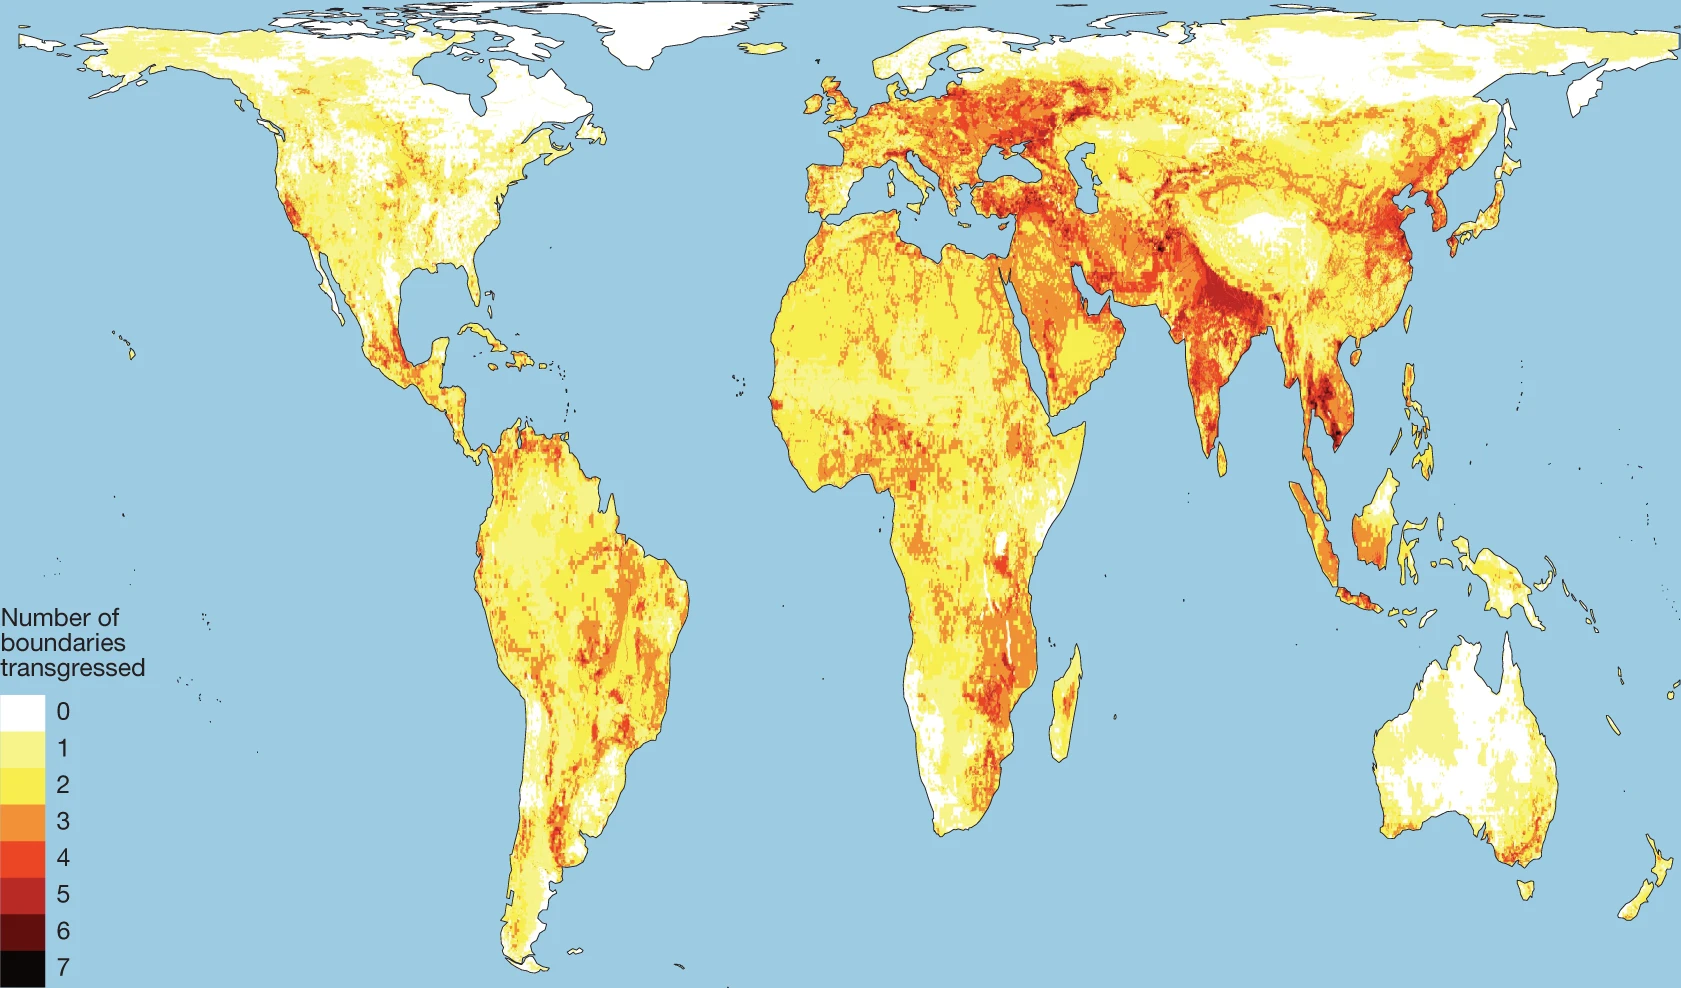 Map showing the number of subglobal climate (two local exposure boundaries), functional integrity, surface water, groundwater, nitrogen, phosphorus and aerosol safe and just Earth system boundaries (ESBs) currently transgressed by location. No more than seven of these eight metrics have their ESBs transgressed in any one pixel. Since climate is a globally defined ESB, we use wet bulb temperatures of over 35°C for at least 1-day per year and low-elevation coastal zones (<5 m) exposed to sea-level rise as proxies for local climate transgression while acknowledging that the impacts of climate change are far more diverse. We also emphasize that exposure of a location does not necessarily imply responsibility for causing or addressing these environmental impacts. We invite the reader to investigate the consequences of different boundary values using the code in the code availability information. Johan Rockström, et al., 2023 / Nature